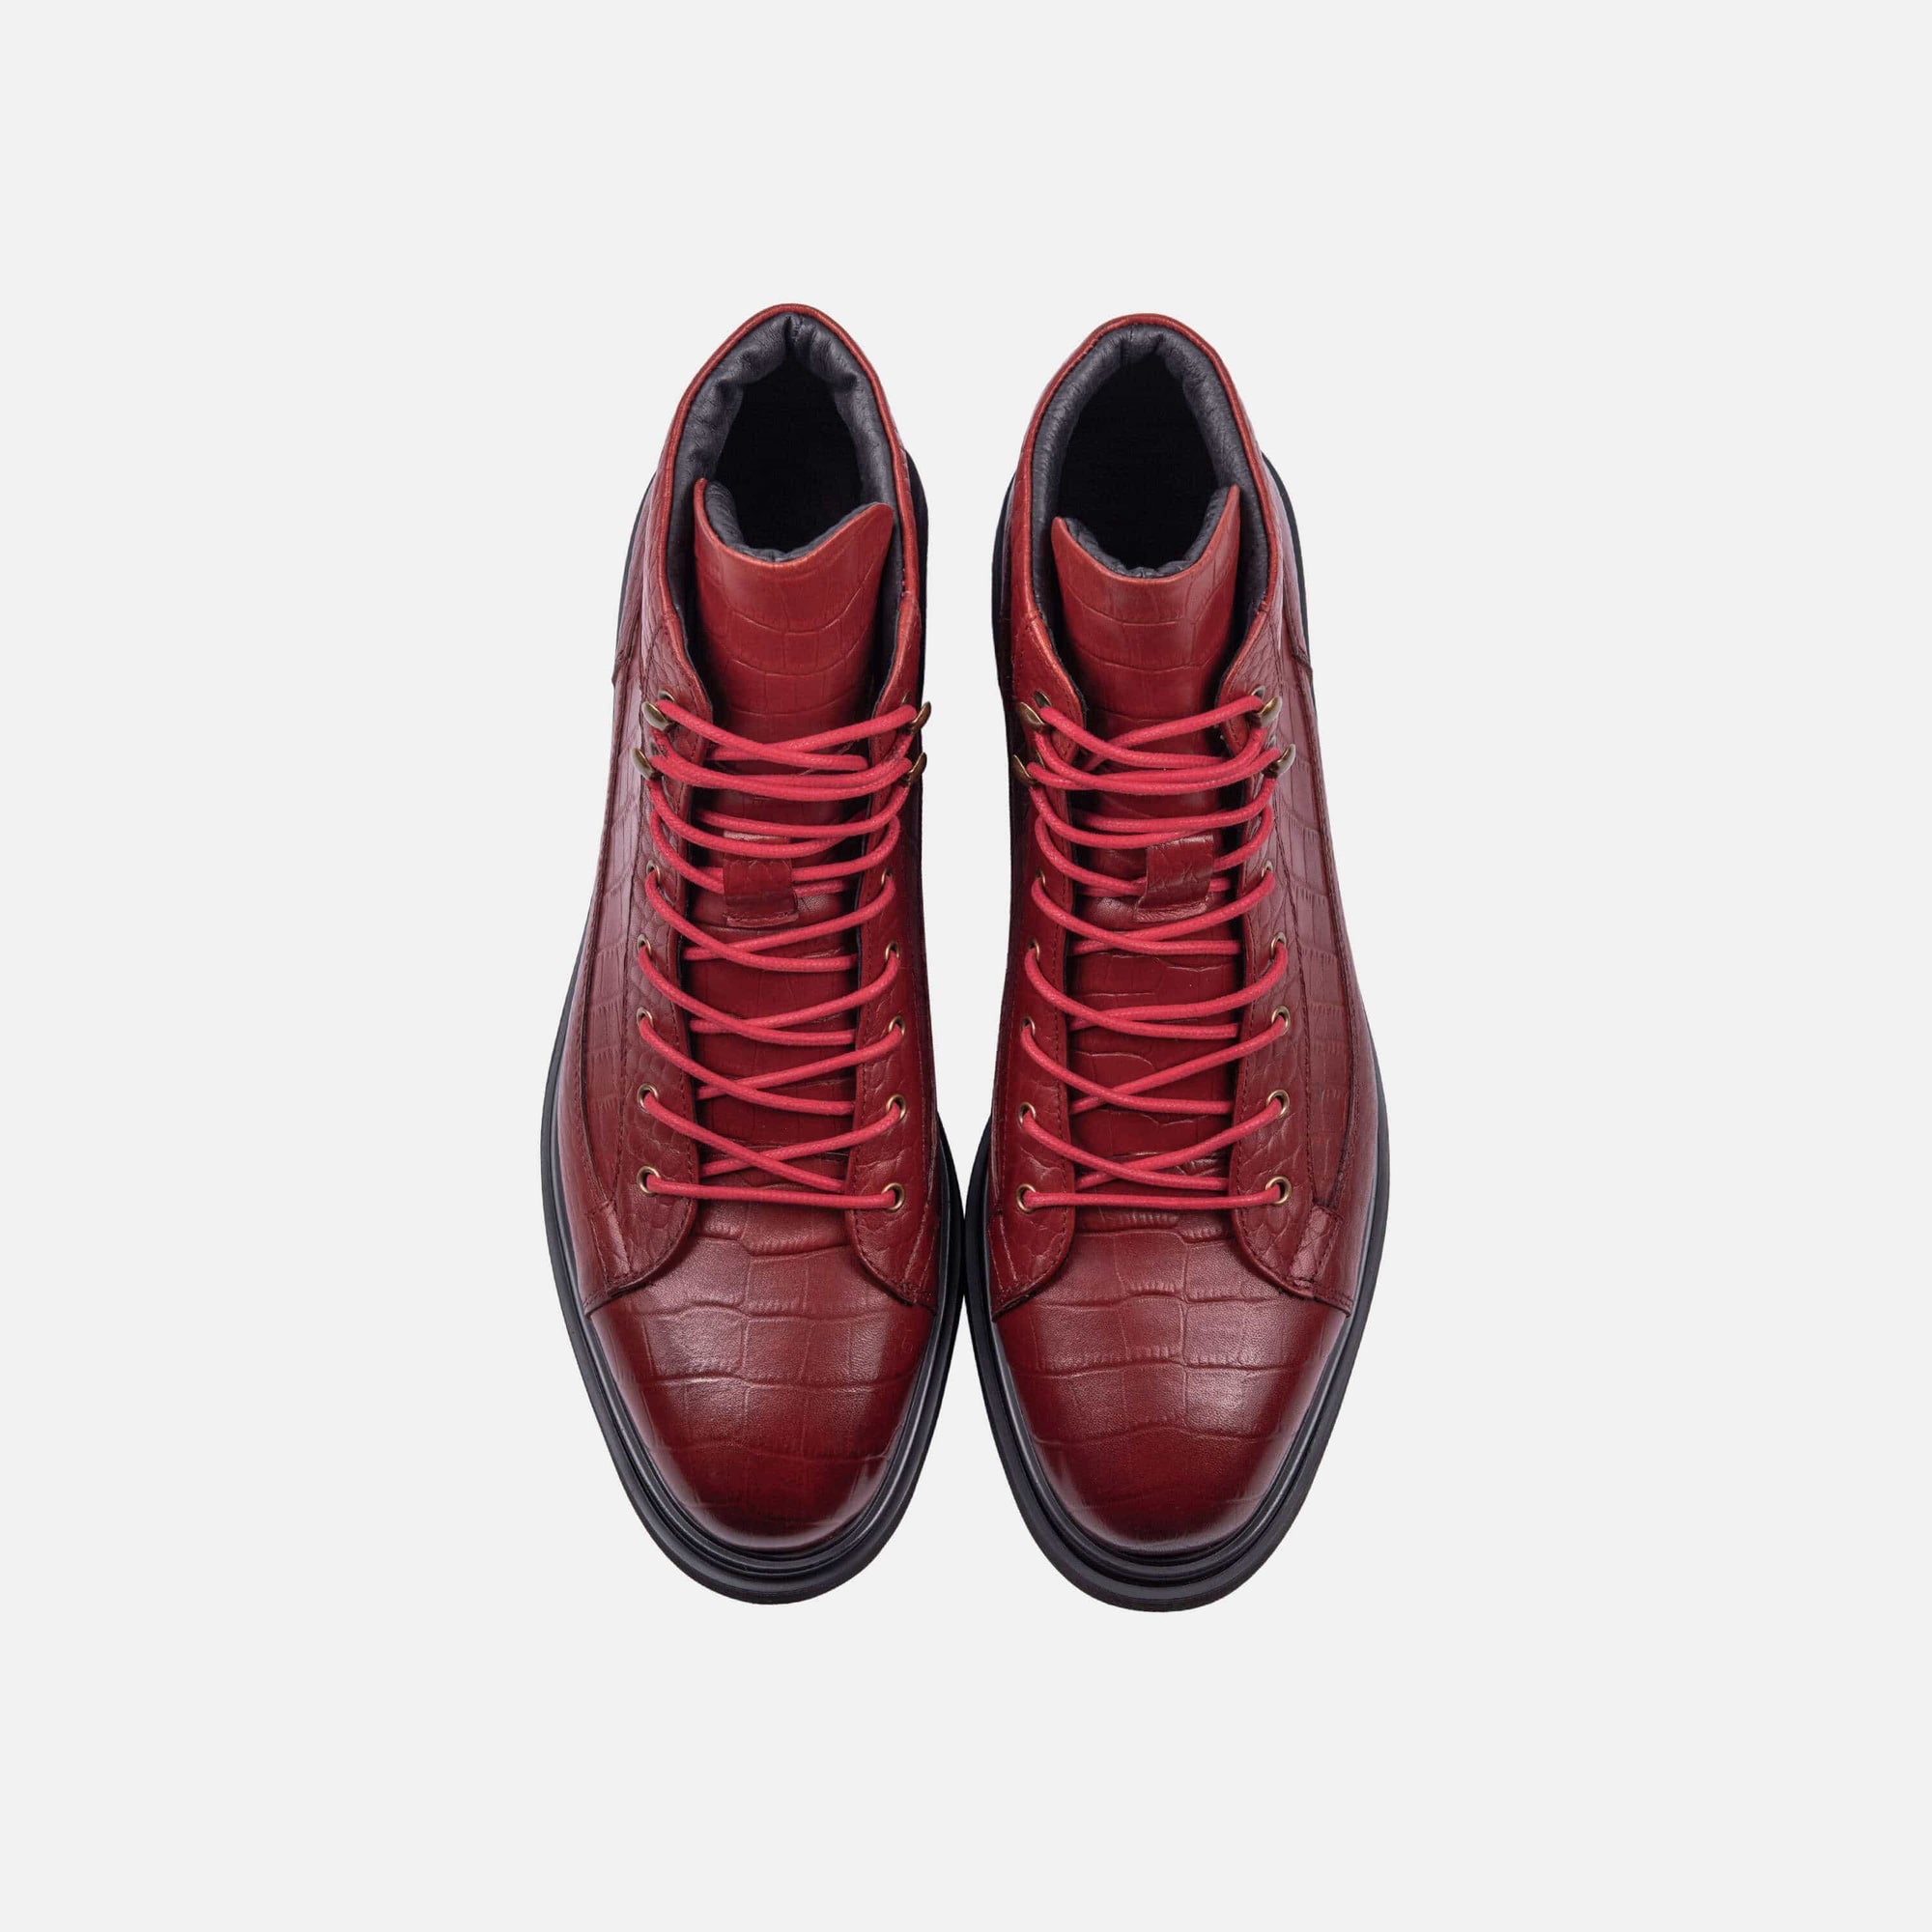 Aiden Red Crocskin Leather Combat Boots